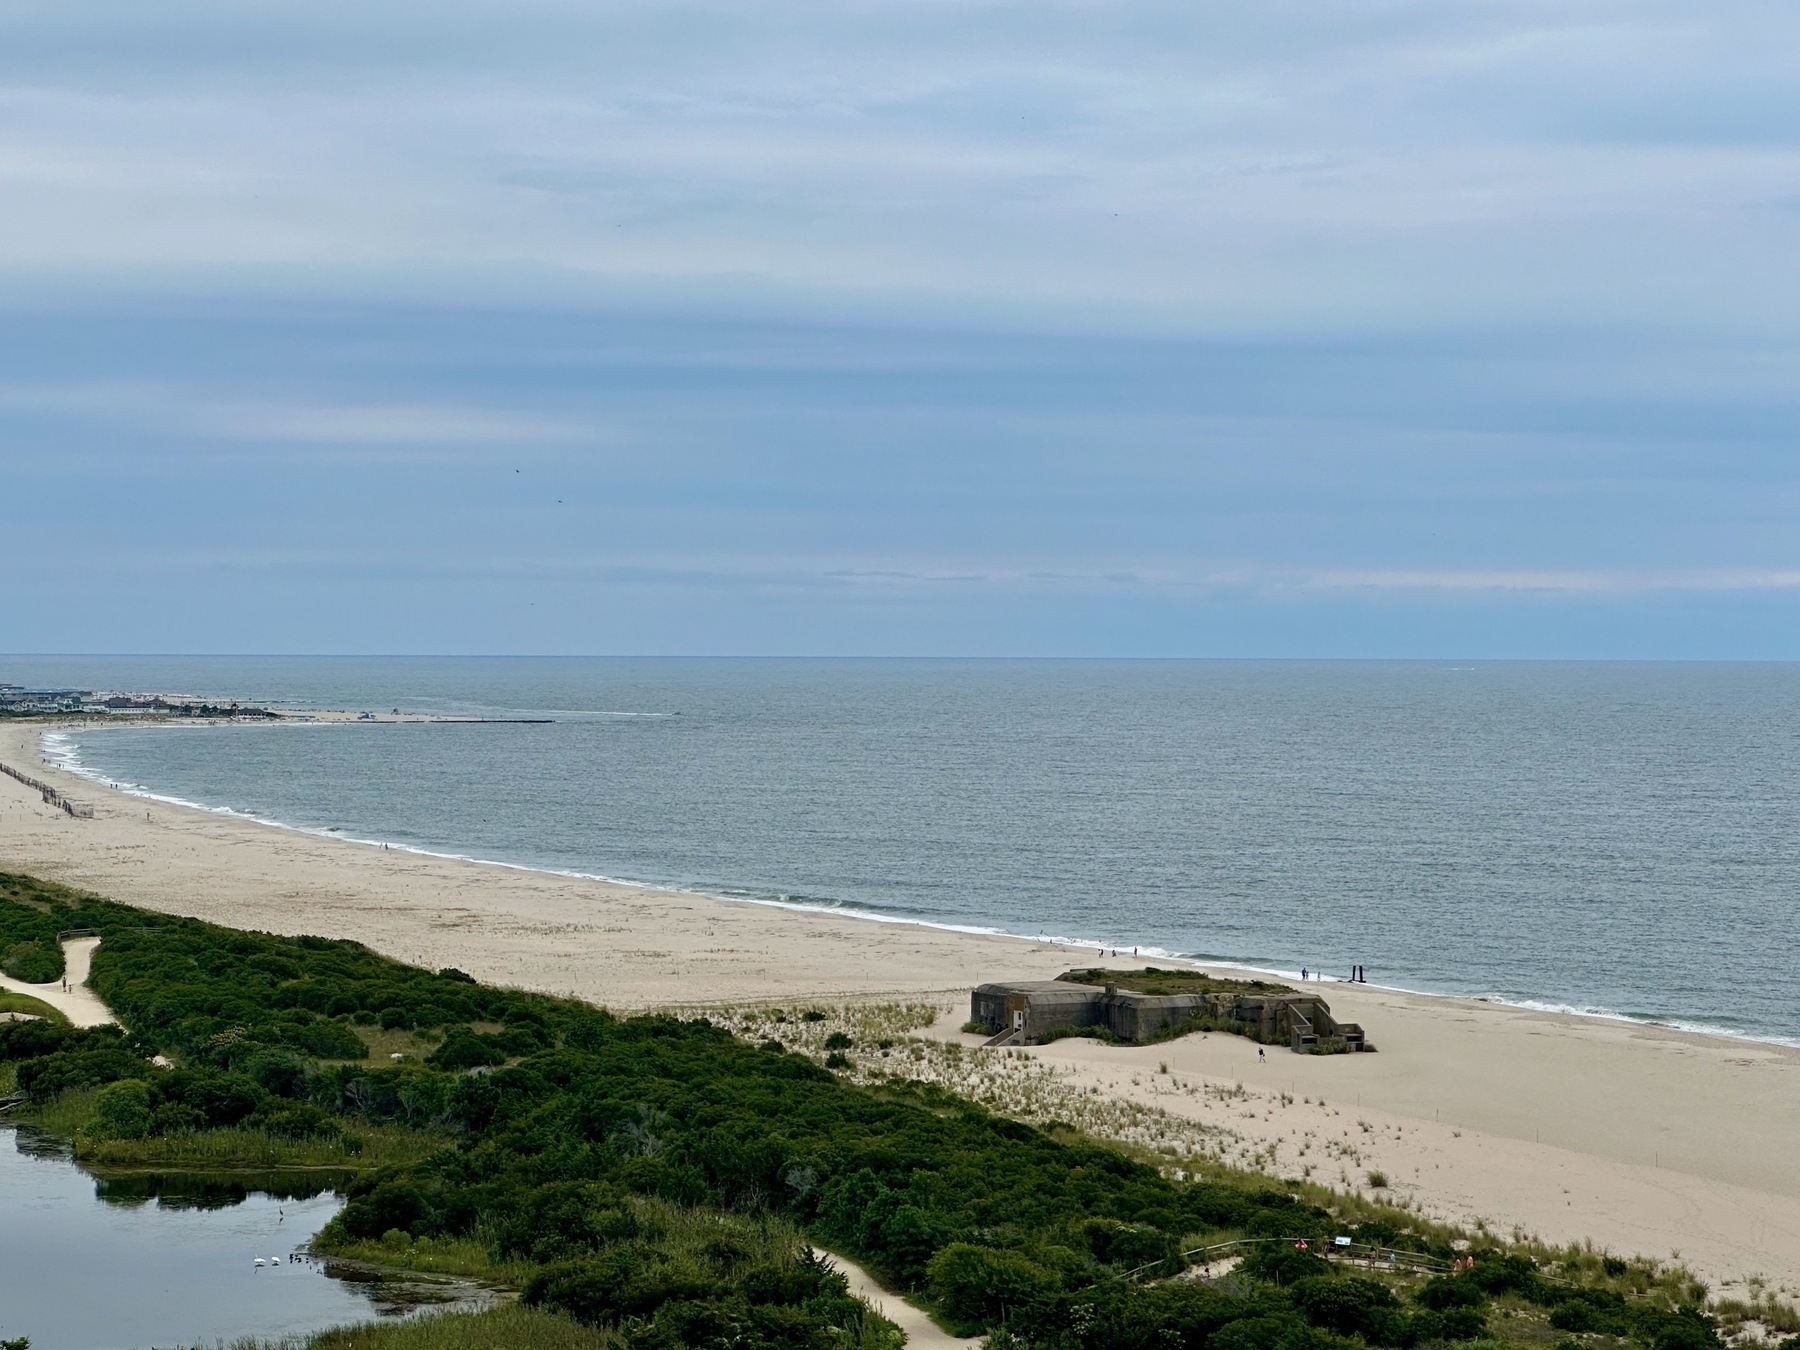 A far-away view of a concrete bunker sitting in the middle of a white sand ocean beach.